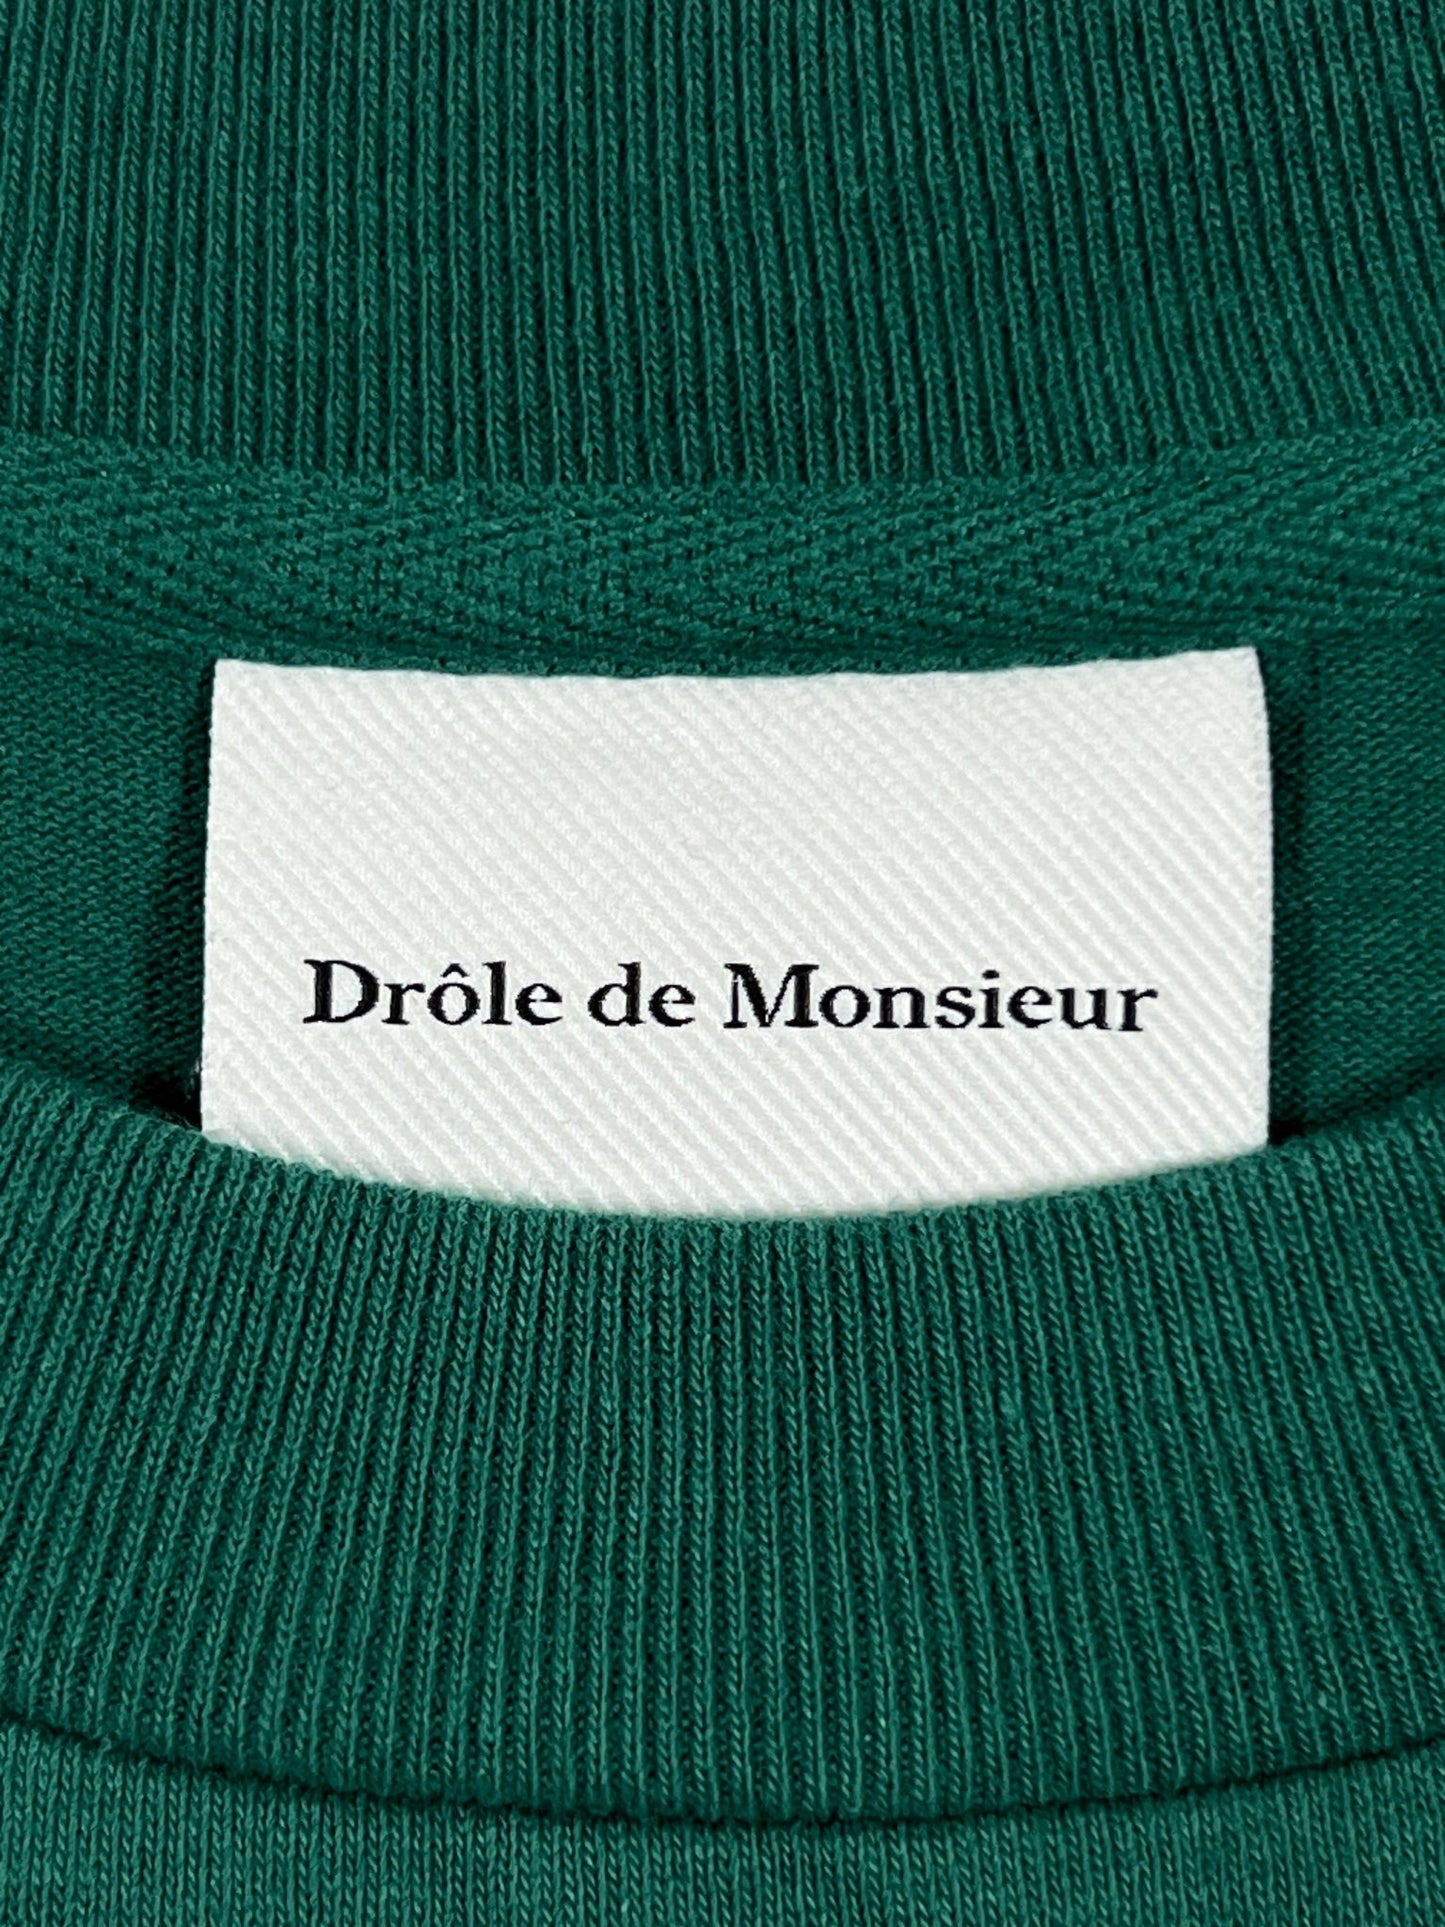 Close-up of a clothing label reading "DROLE DE MONSIEUR" on a white background sewn into a green ribbed neckline.